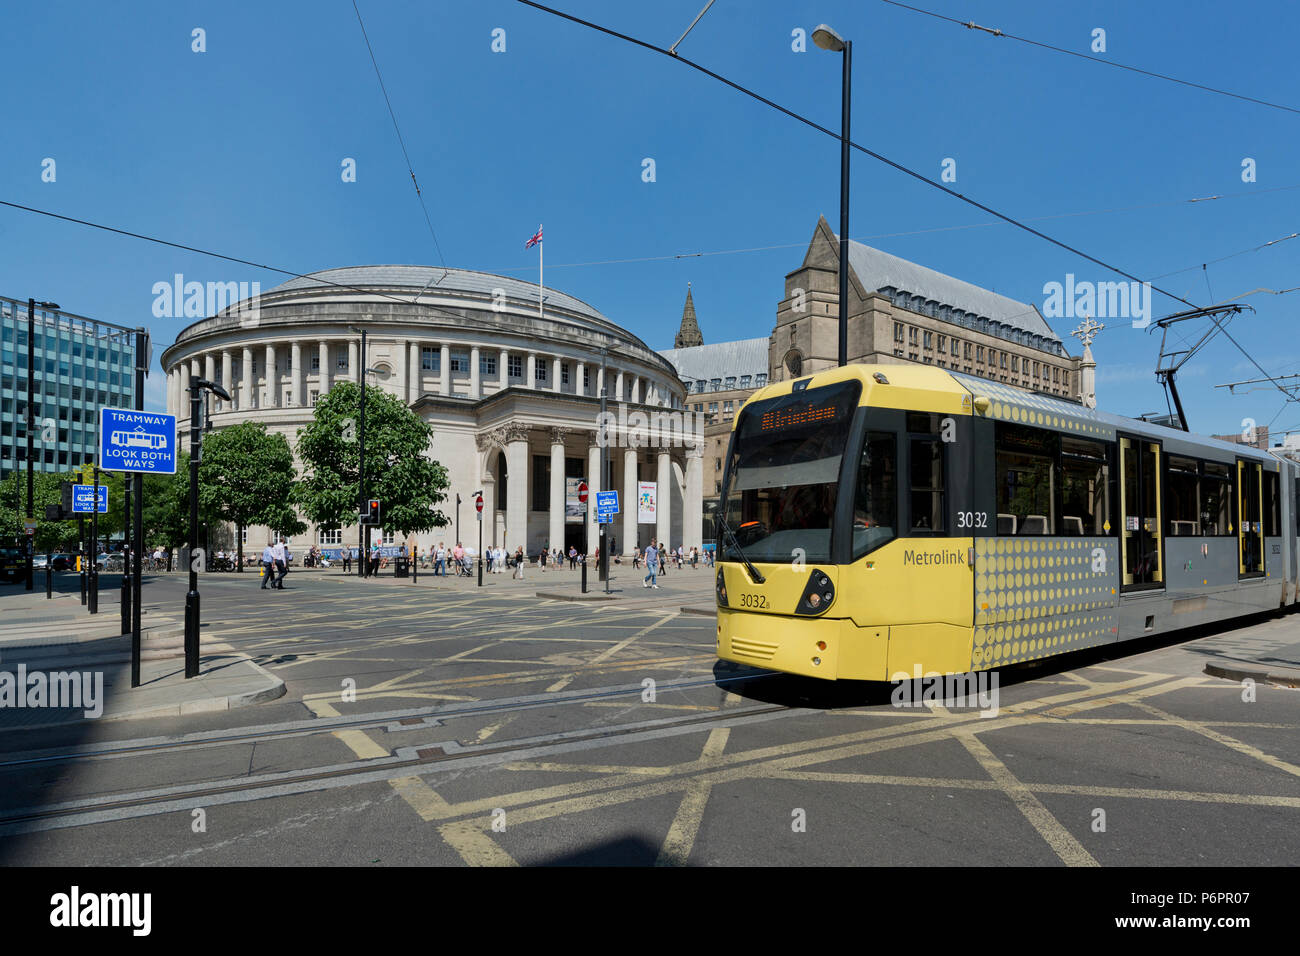 A Metrolink tram passes infront of the Central Library in St Peter's Sqaure in Manchester. Stock Photo